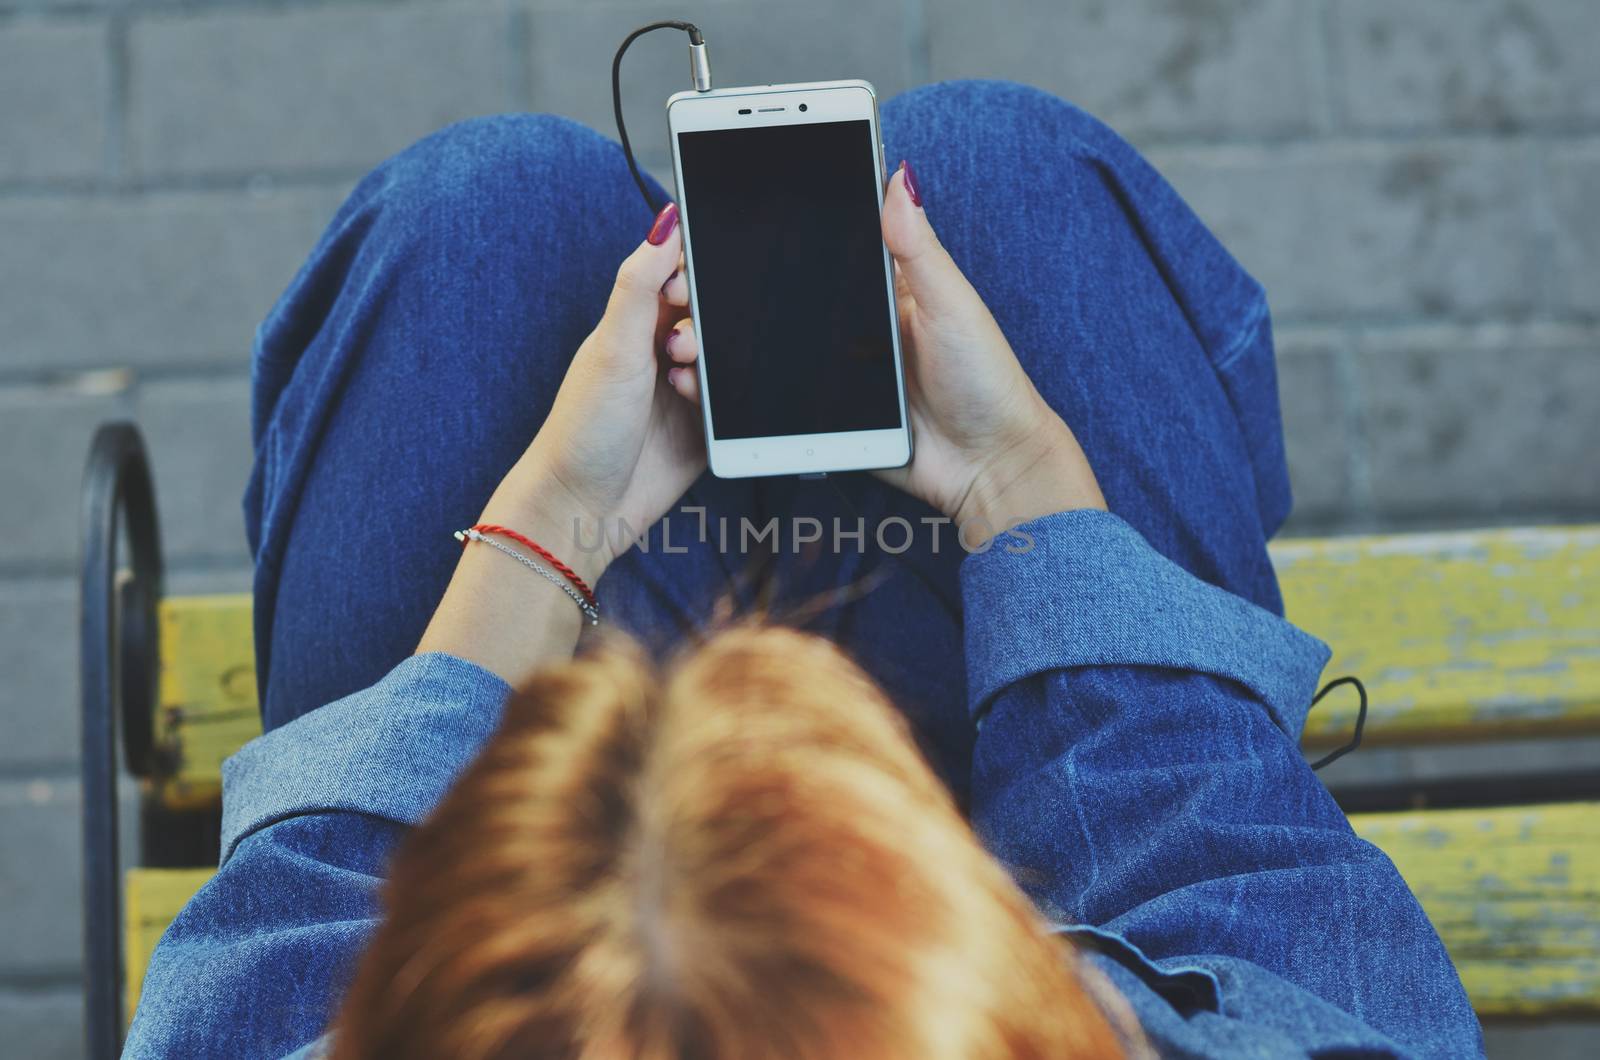 A young pretty student uses a smartphone sitting on a yellow bench in a denim jacket on the street